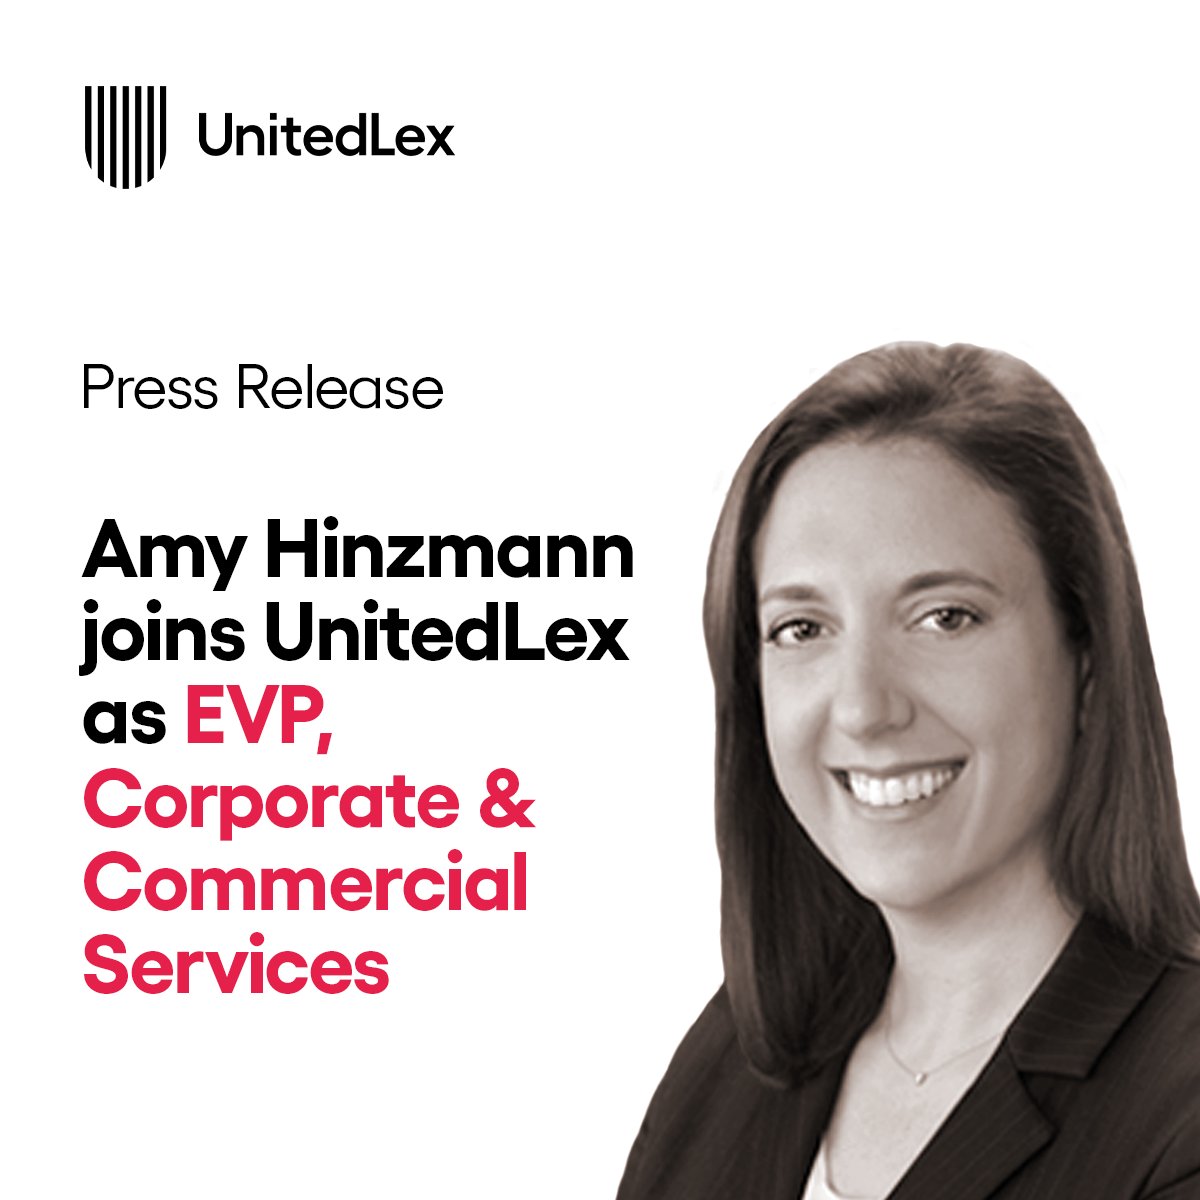 “Building on its history of innovation, @UnitedLex is bringing energy to the legal market with solutions that help lawyers rethink how they align their teams to deliver against broader business goals.' hubs.li/Q02qNjlF0